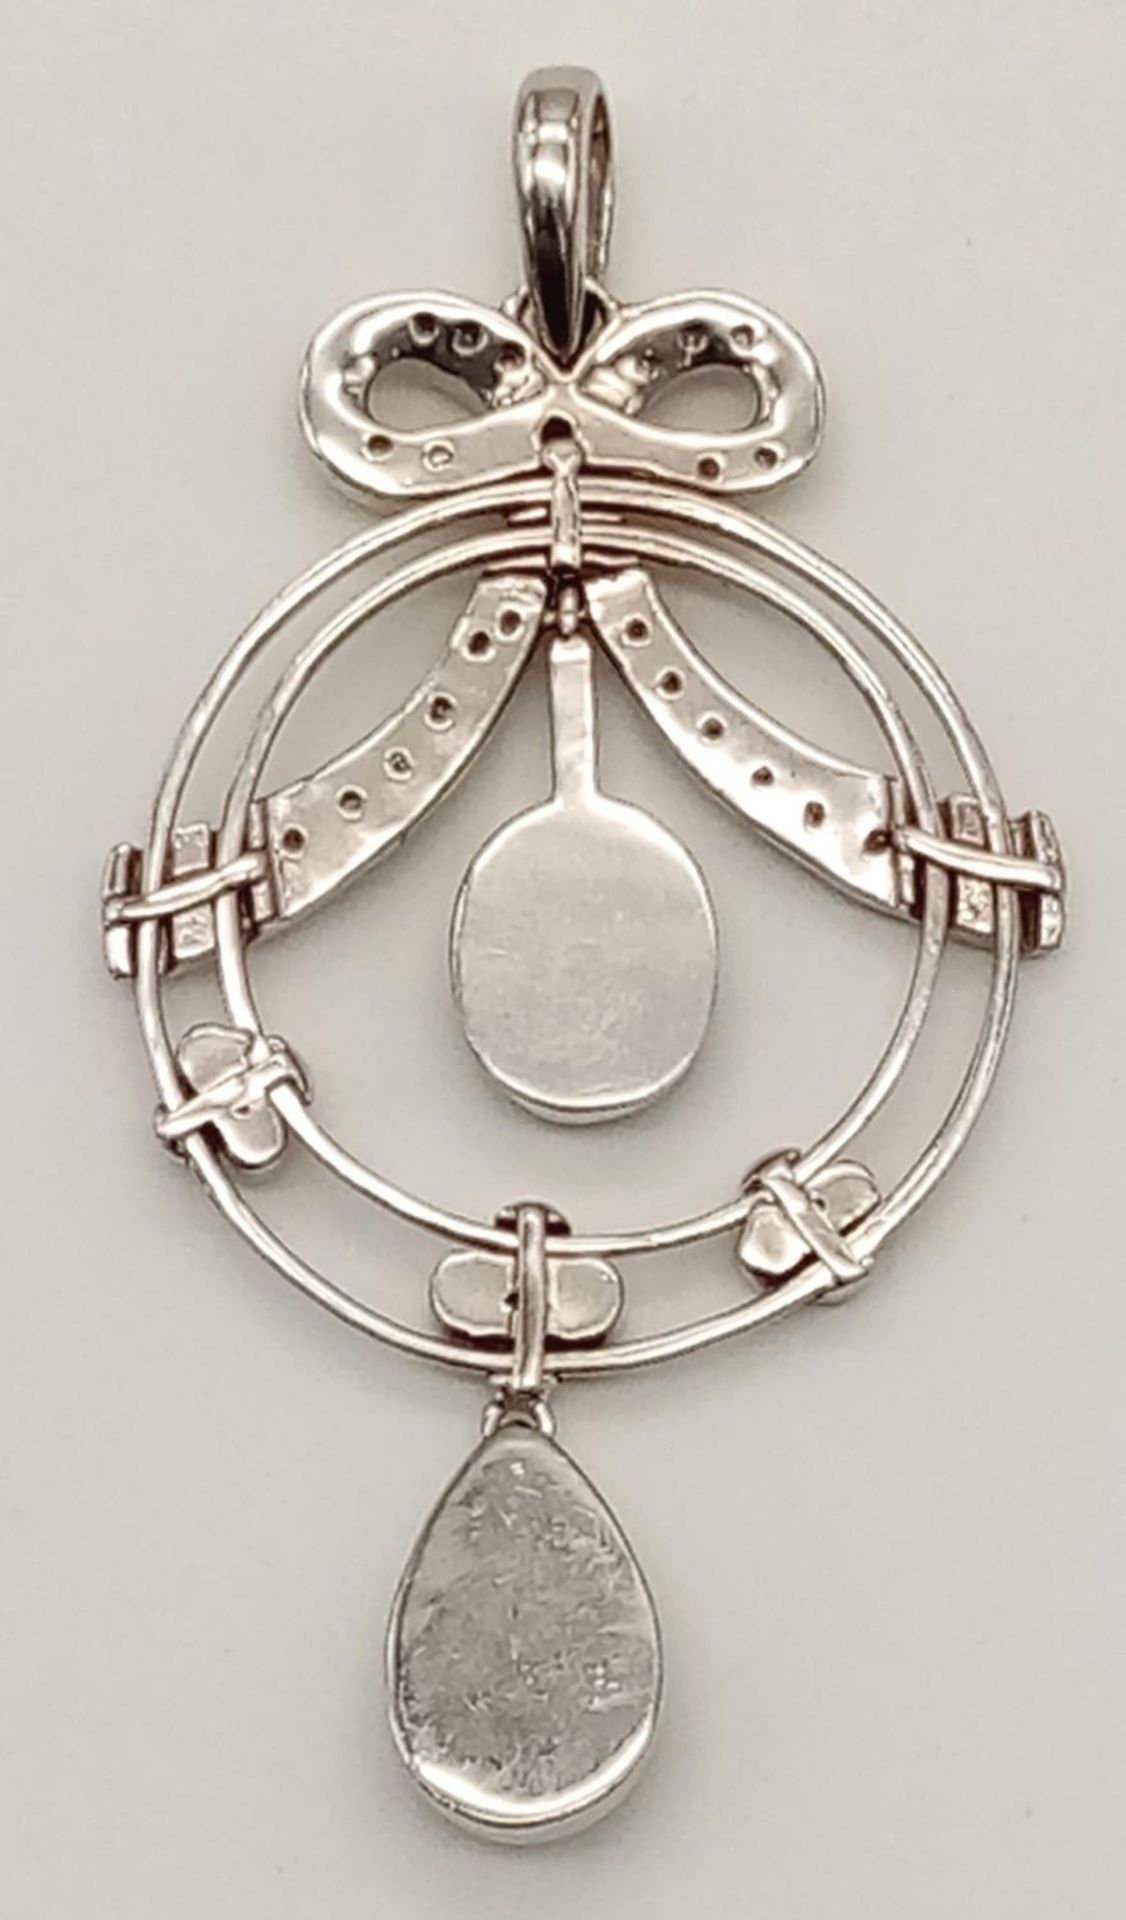 A VERY ATTRACTIVE STERLING SILVER STONE SET FANCY DROP PENDANT, BOW TIE DESIGNED WITH 2 LARGE - Image 5 of 6